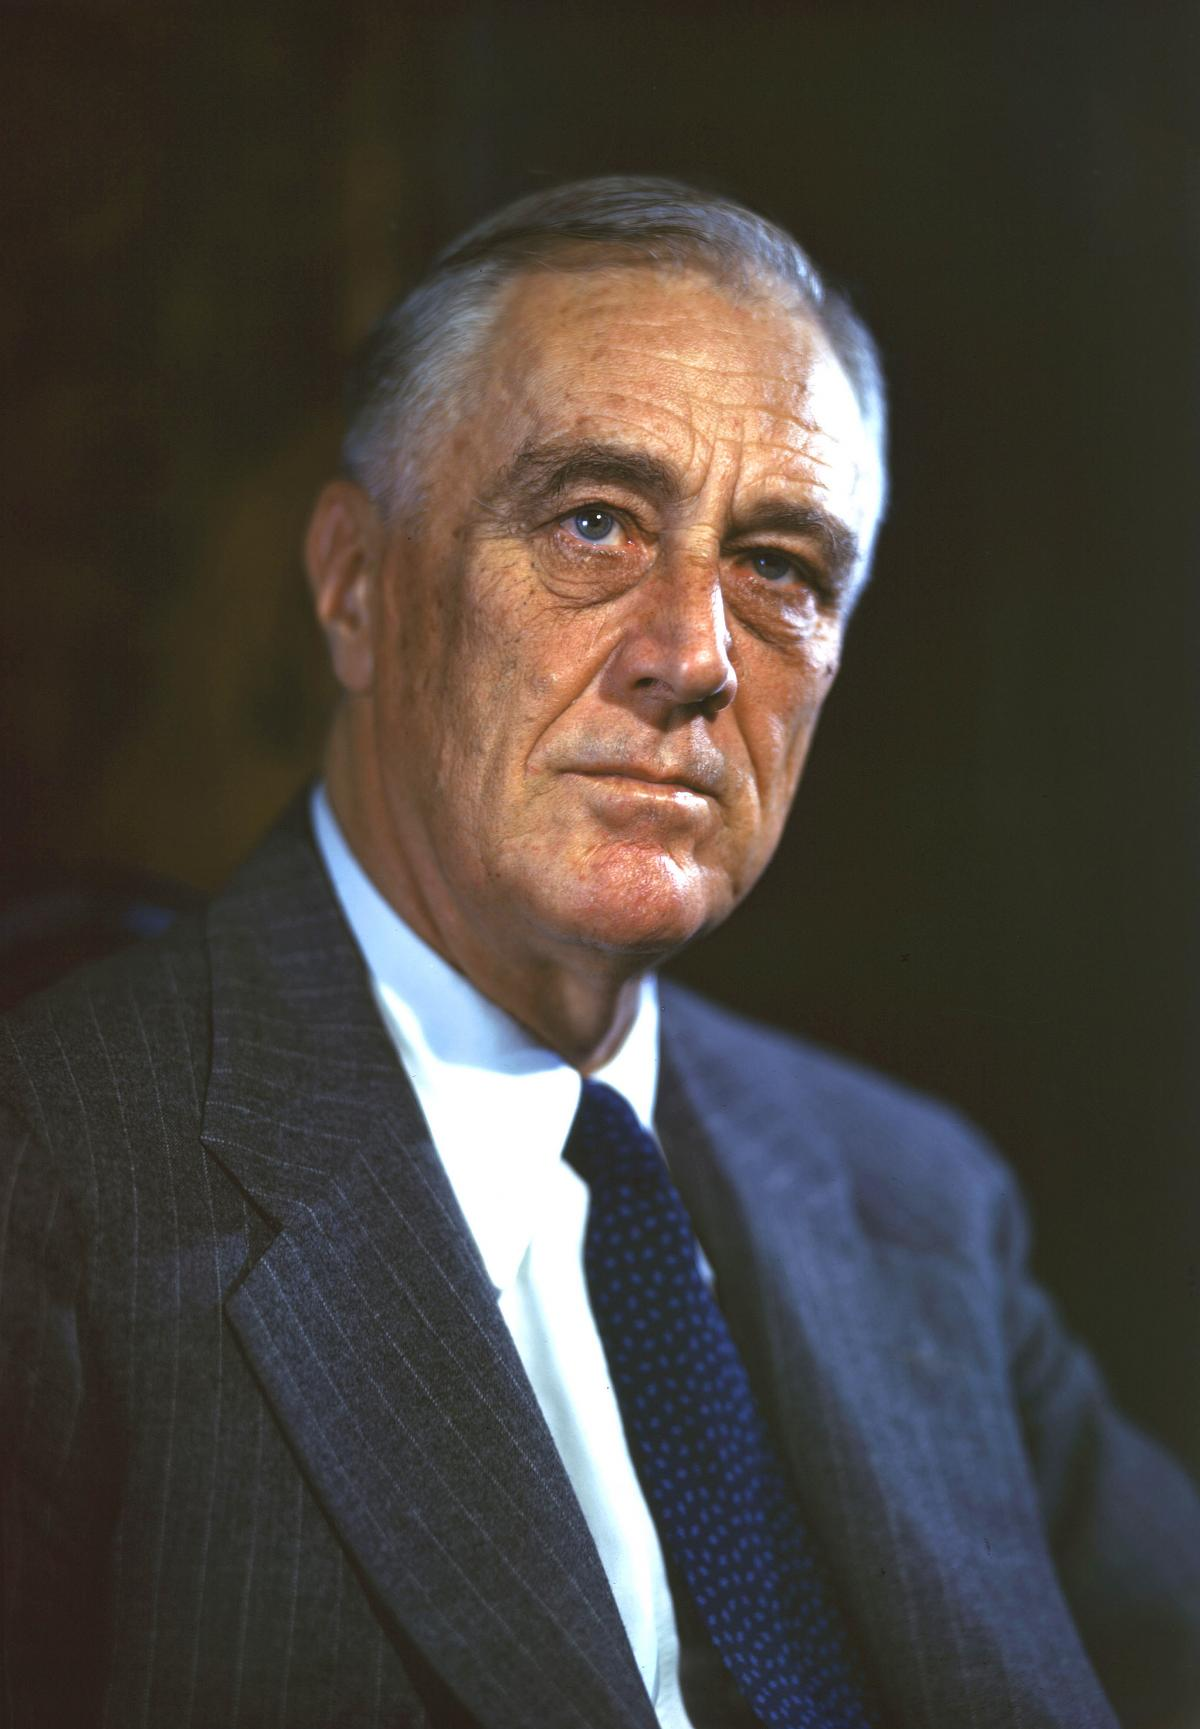 High Quality FDR, whose New Deal helped people. The GOP fought it all. Blank Meme Template